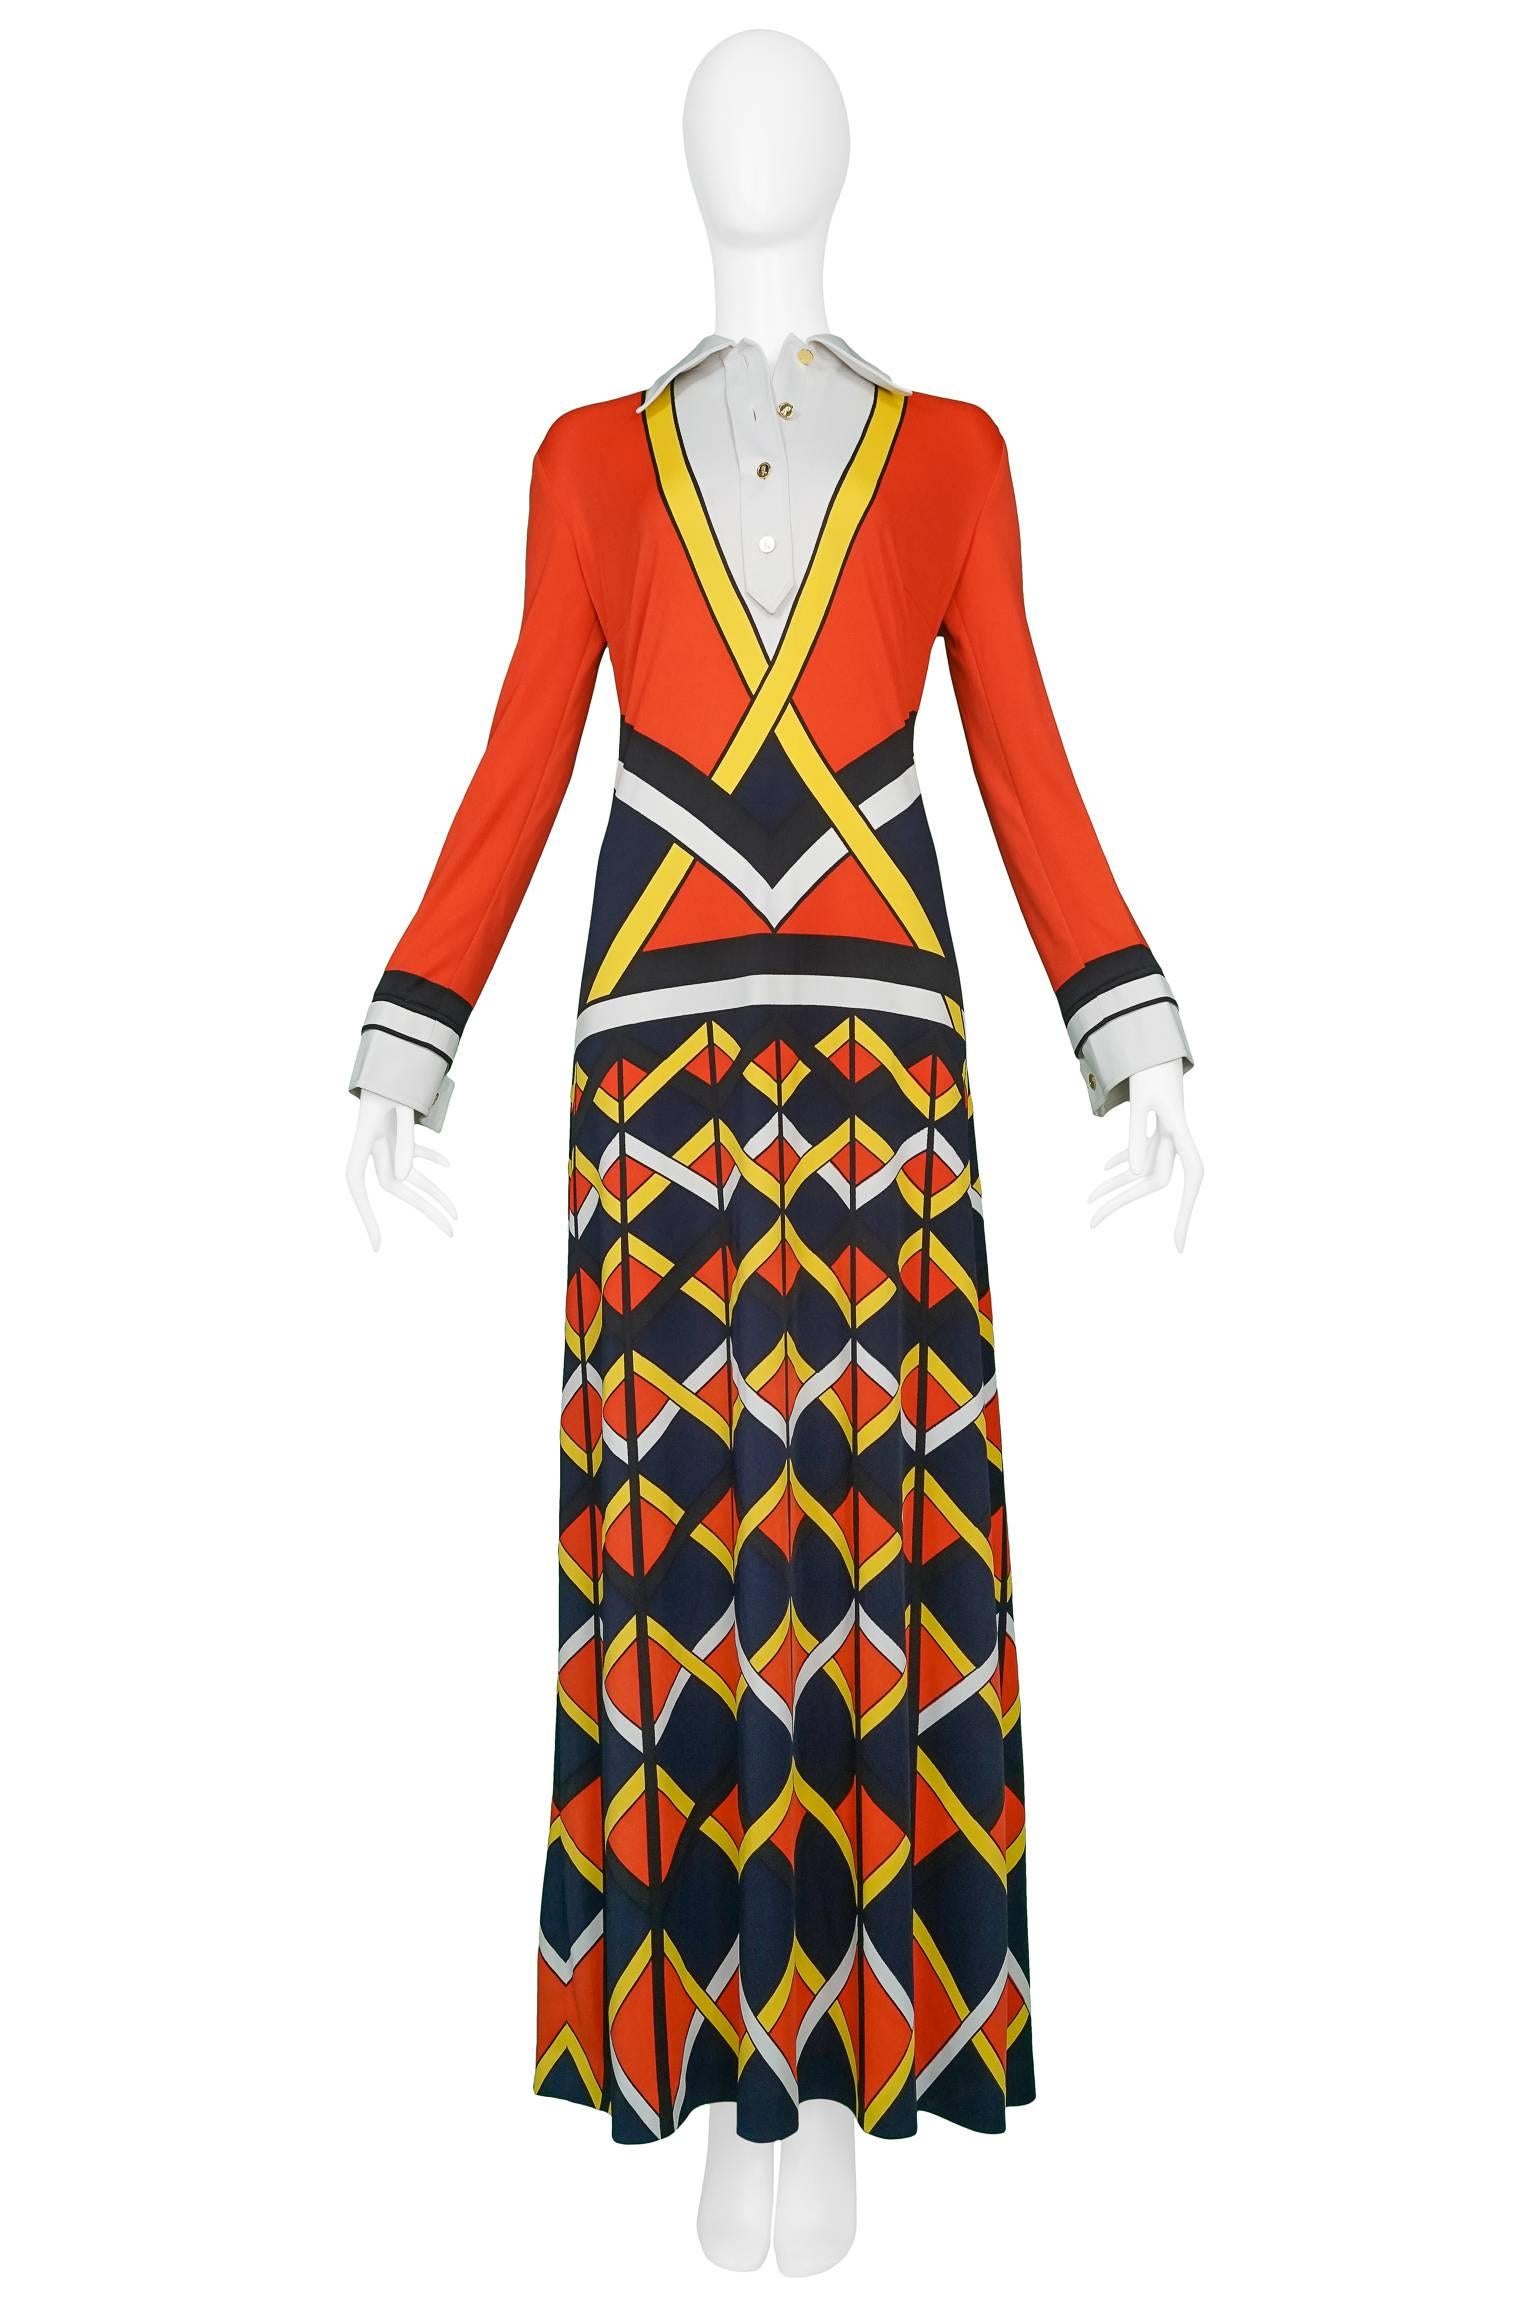 Vintage red, yellow, black and white Roberta di Camerino trompe l'oeil jersey maxi with sleeves. Dress features signature Roberta print and gold tone 